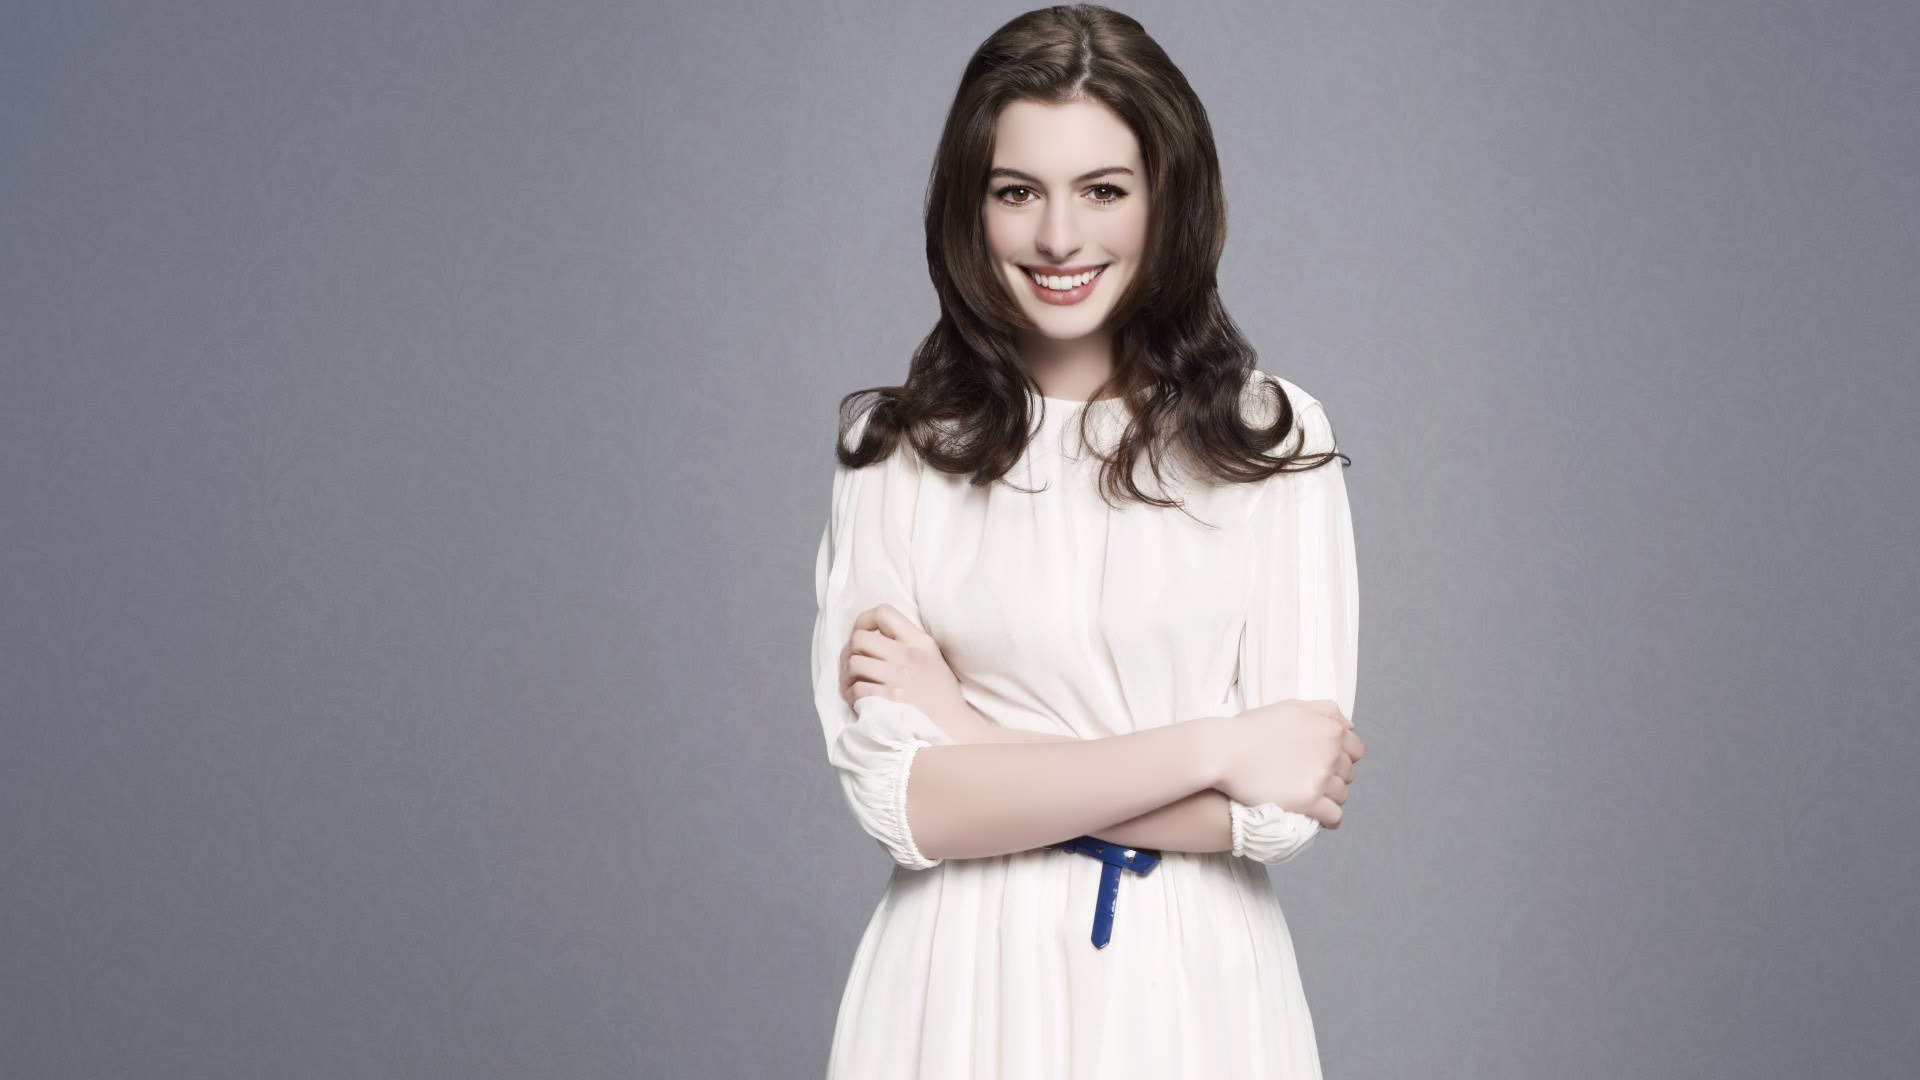 Cute Anne Hathaway for 1920 x 1080 HDTV 1080p resolution